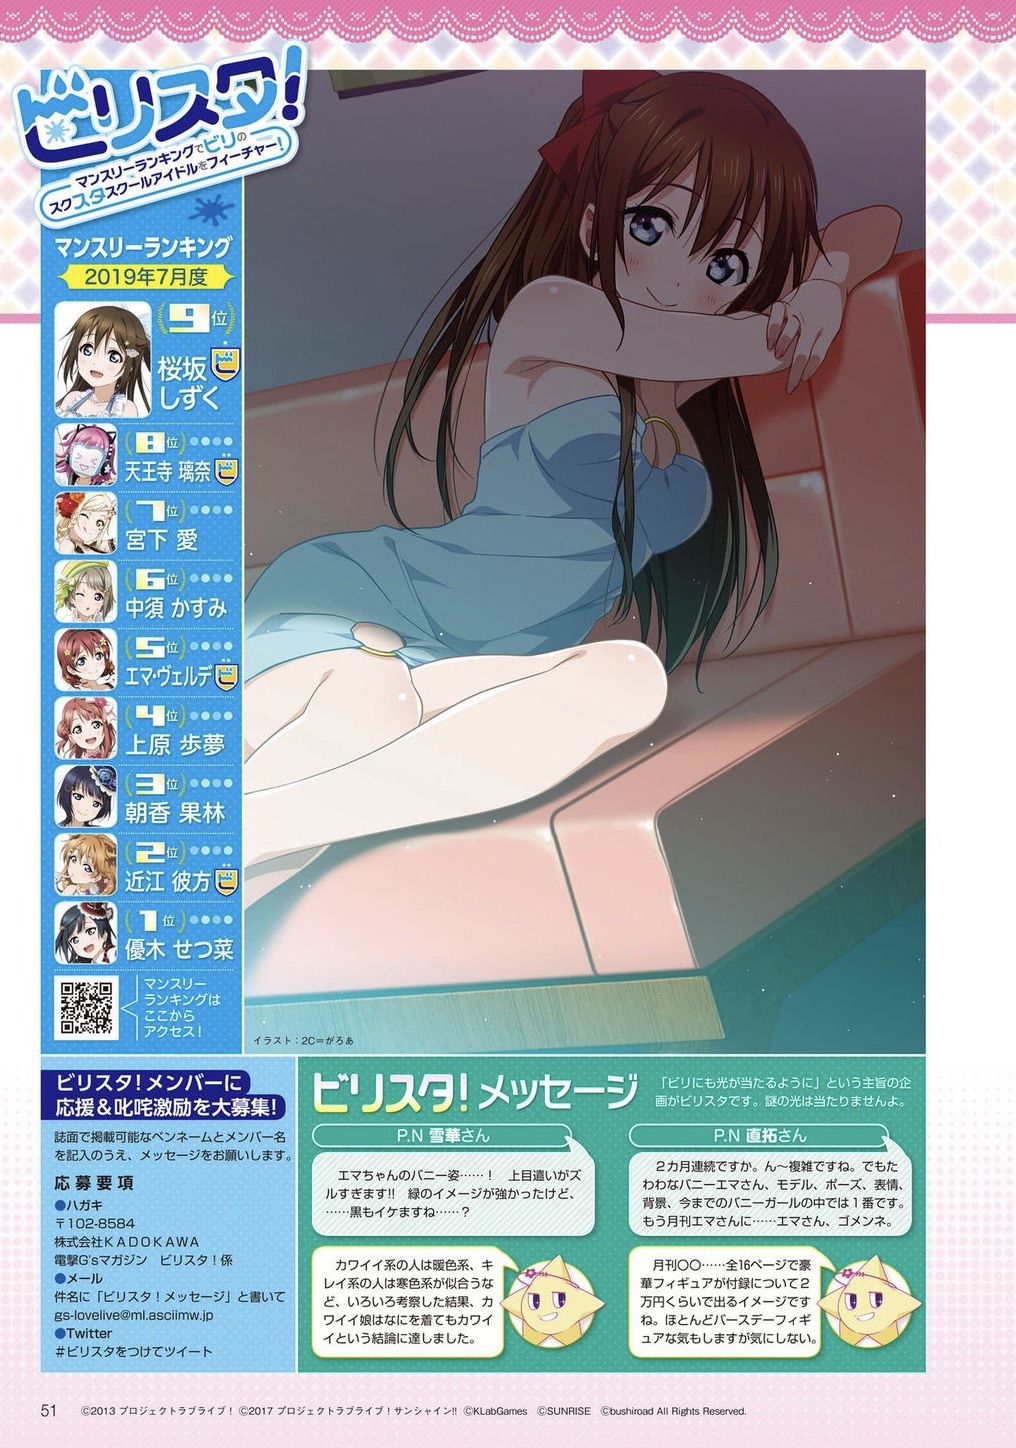 【Good news】Love Live of the new series, too sex wwwwww 3